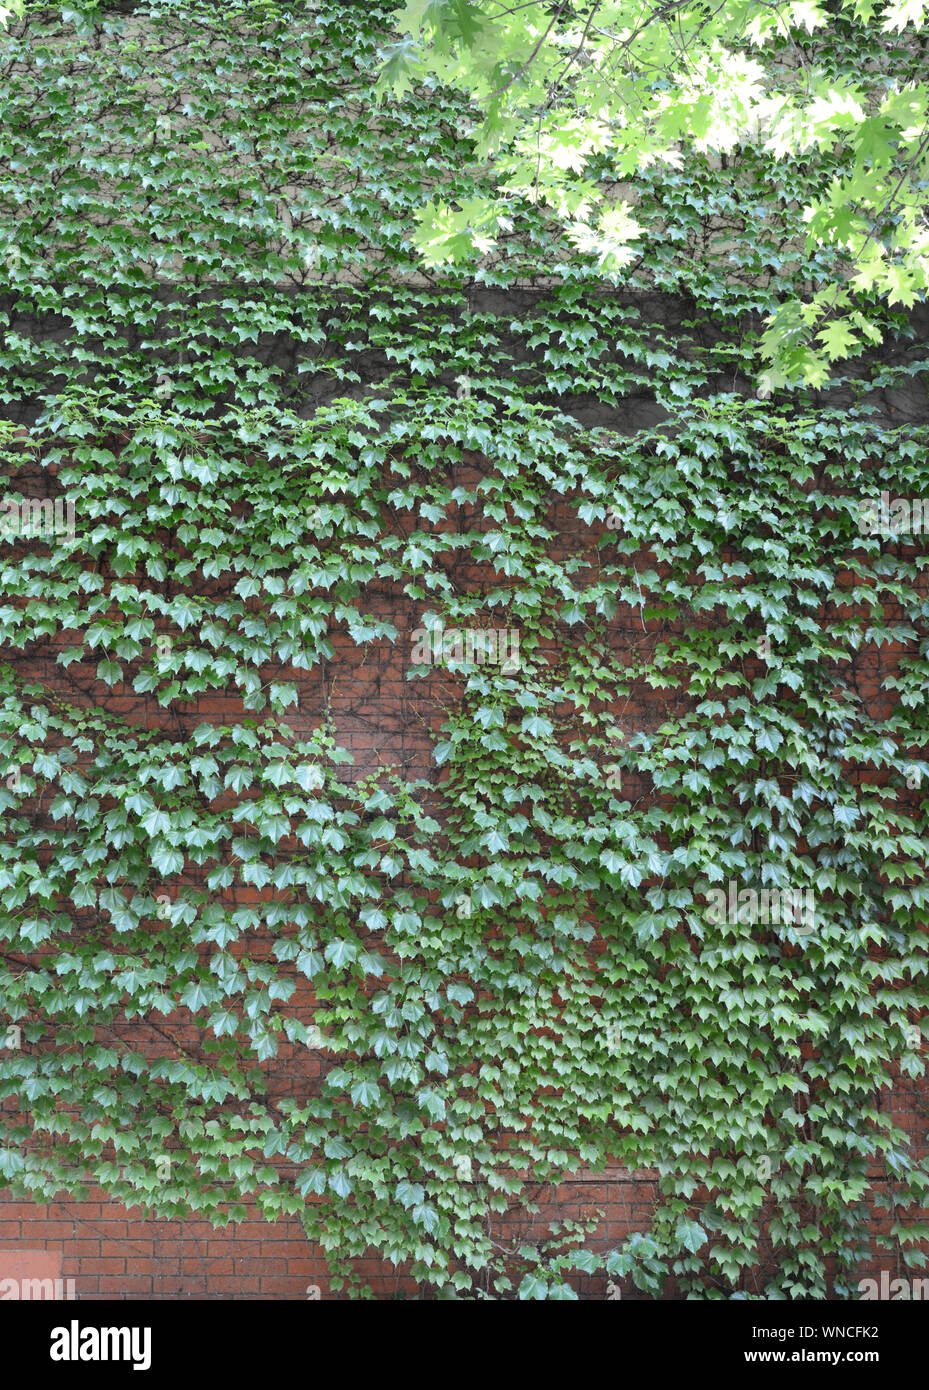 Photo of a brick wall covered with clinging ivy. Beautiful garden feature but can cause damage. Stock Photo